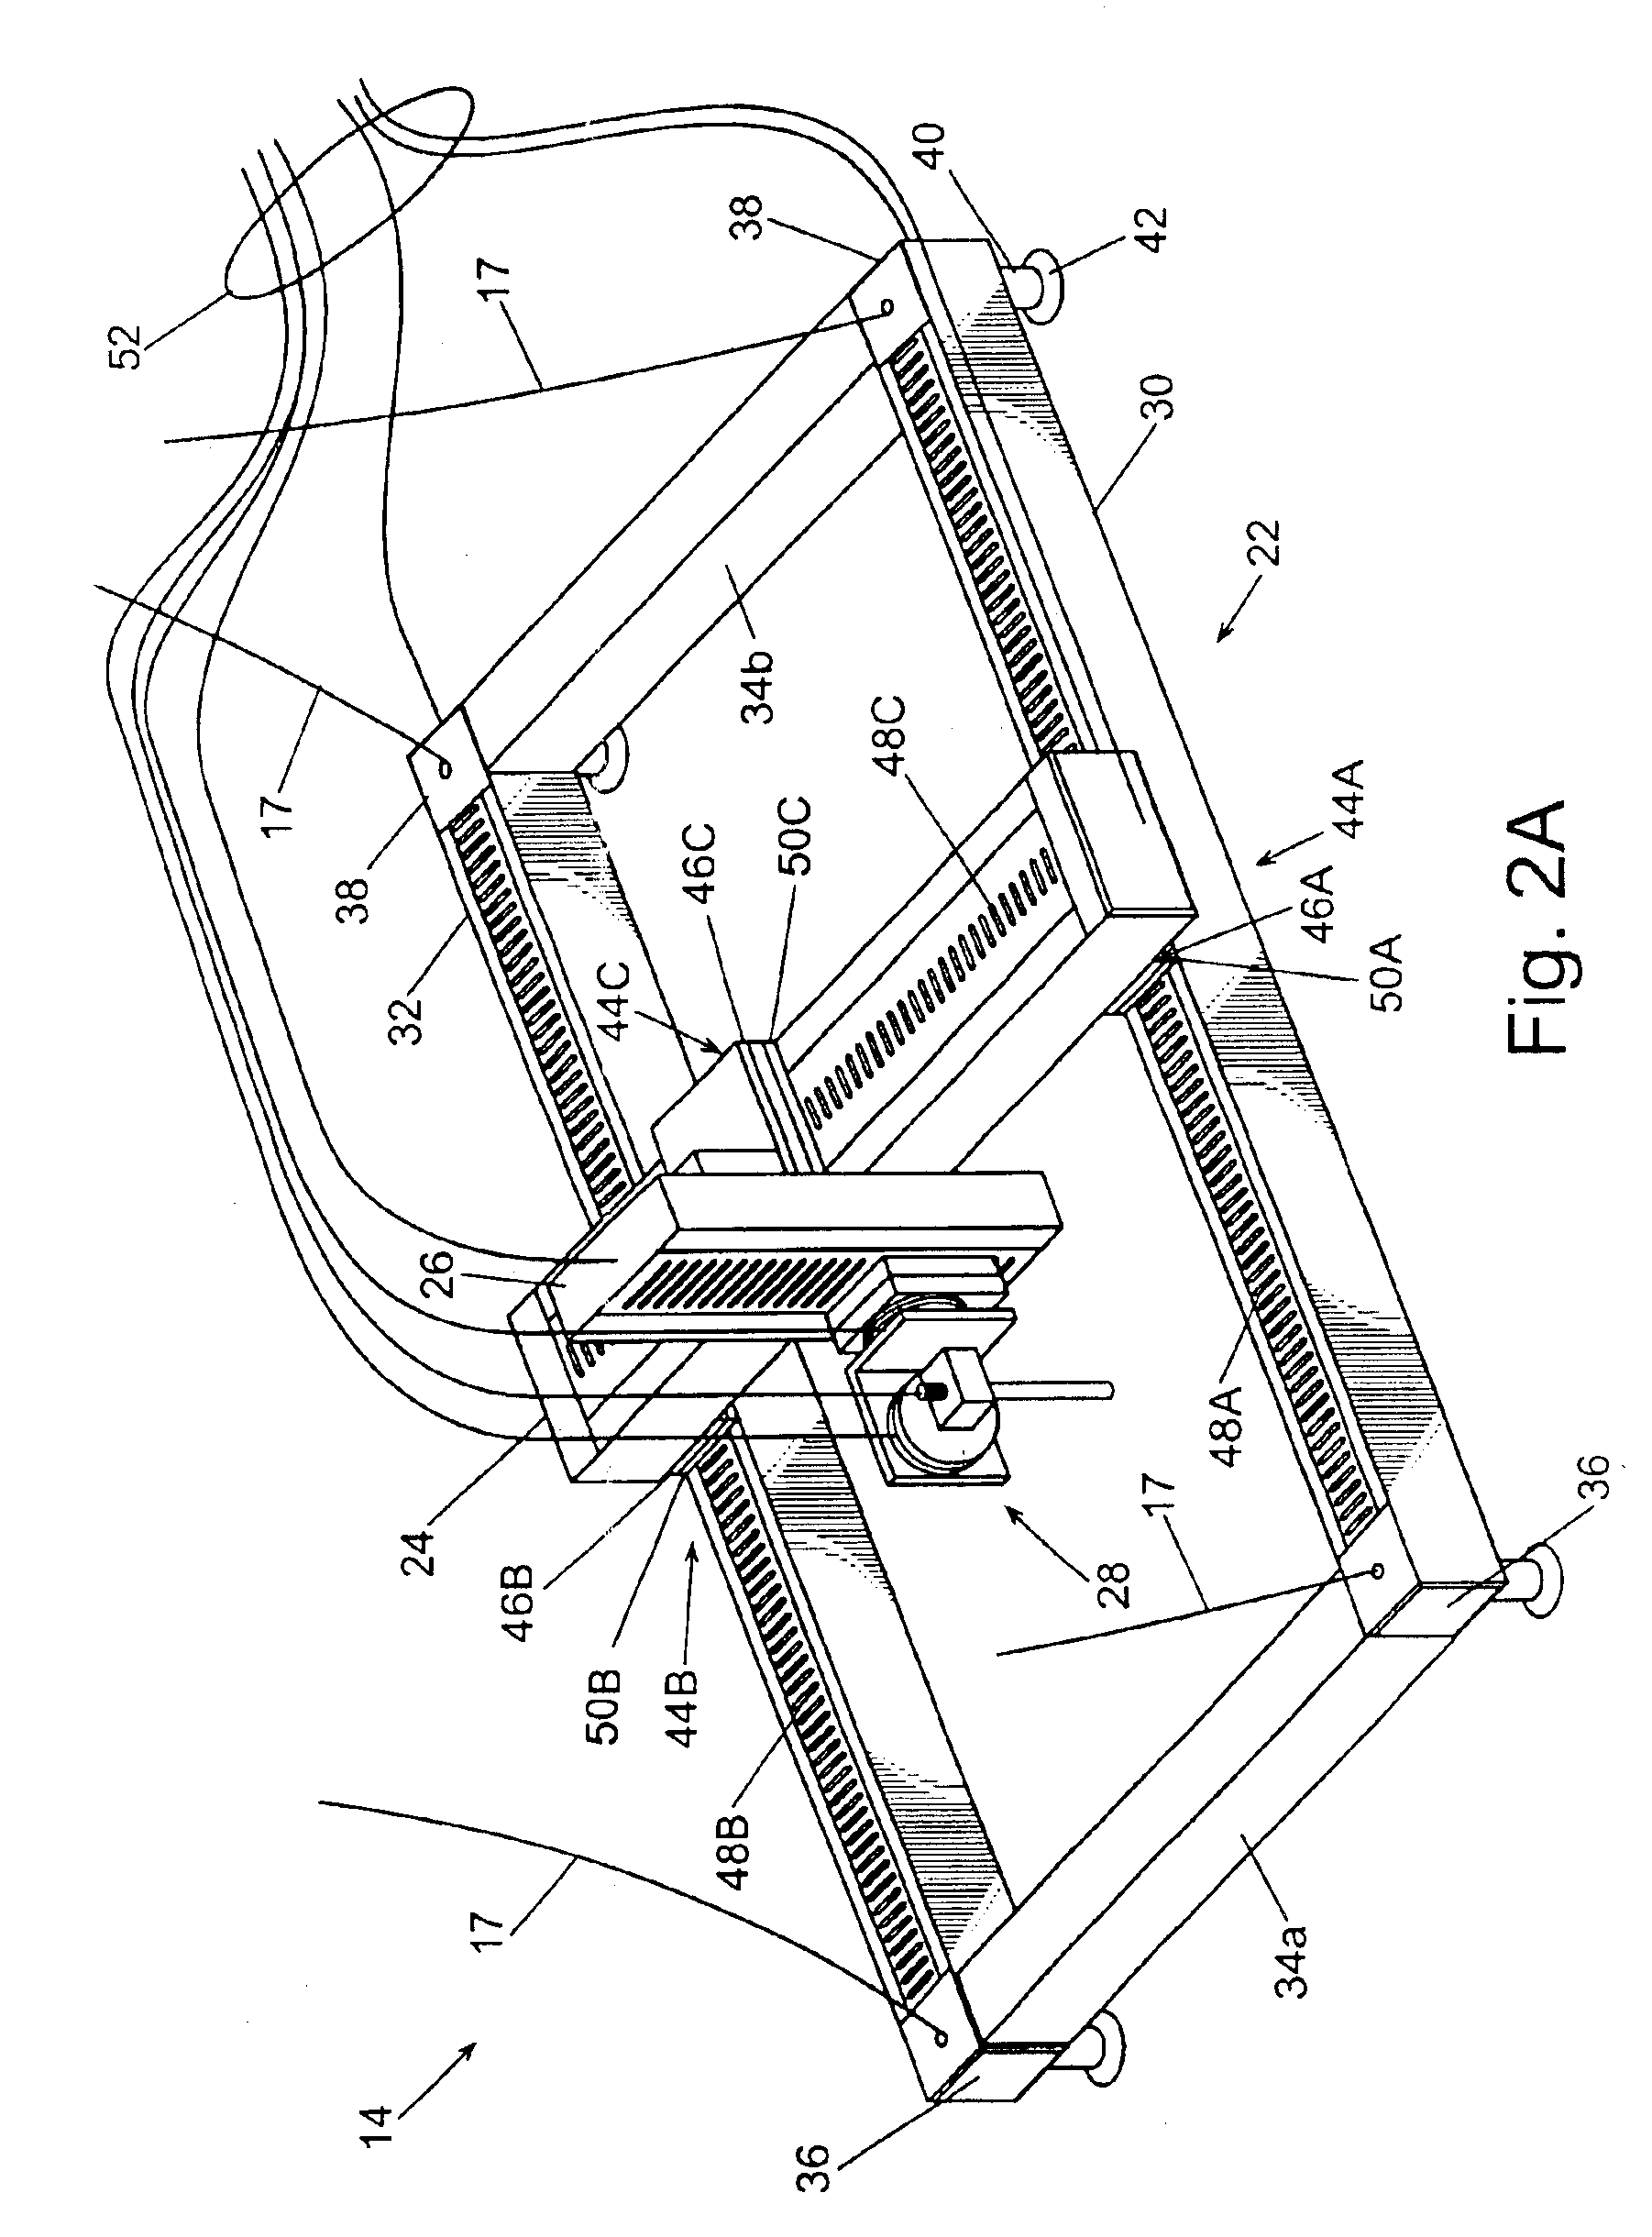 Acoustic coupling with a fluid retainer